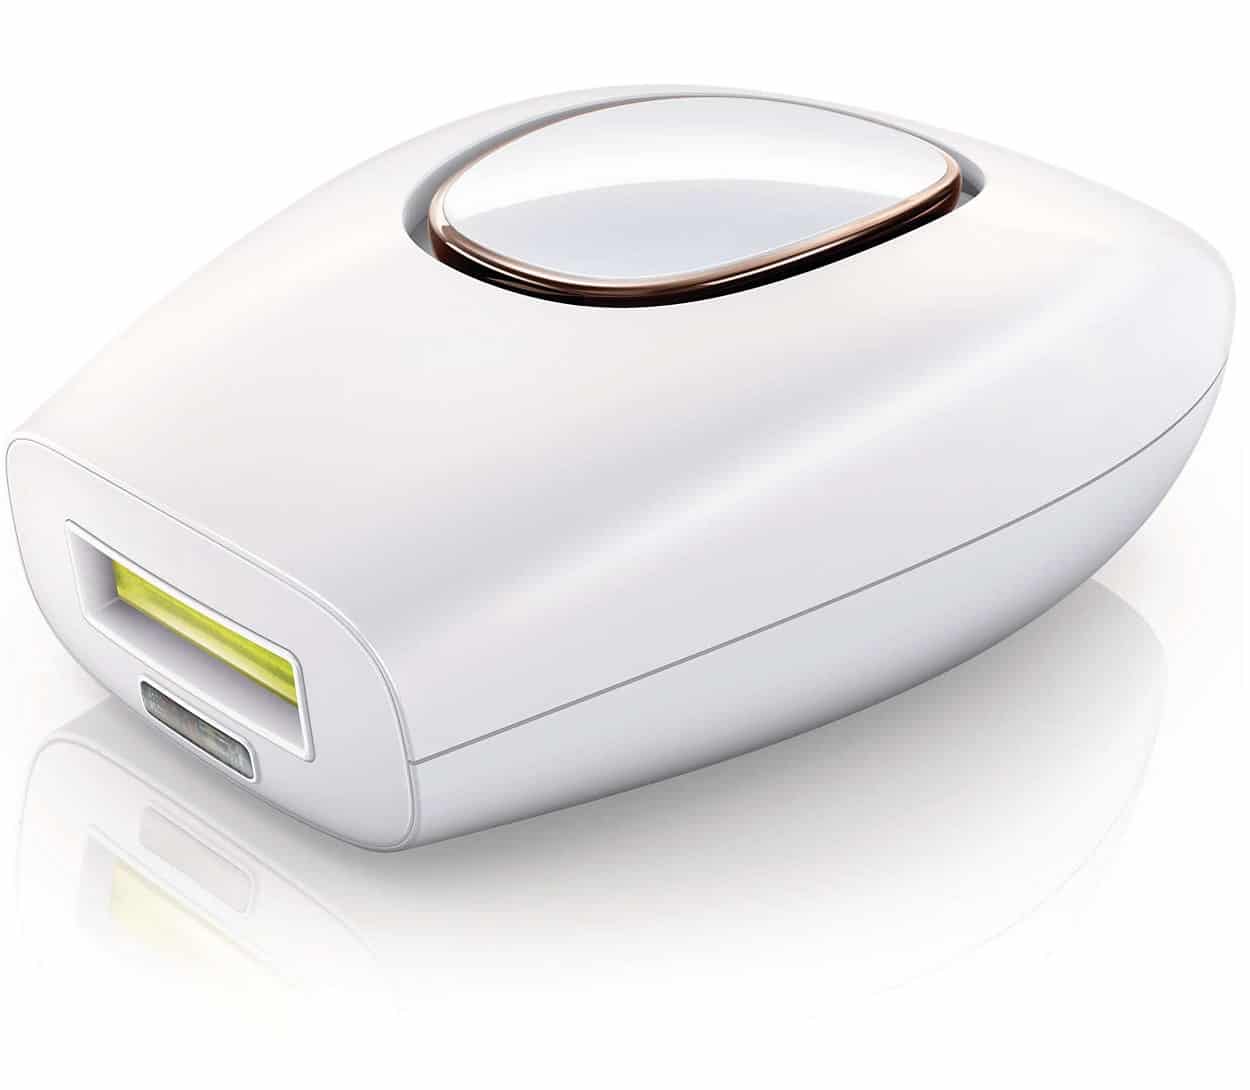 Philips Lumea Comfort SC1981 mains powered device is small and lightweight with top of the range features and functions